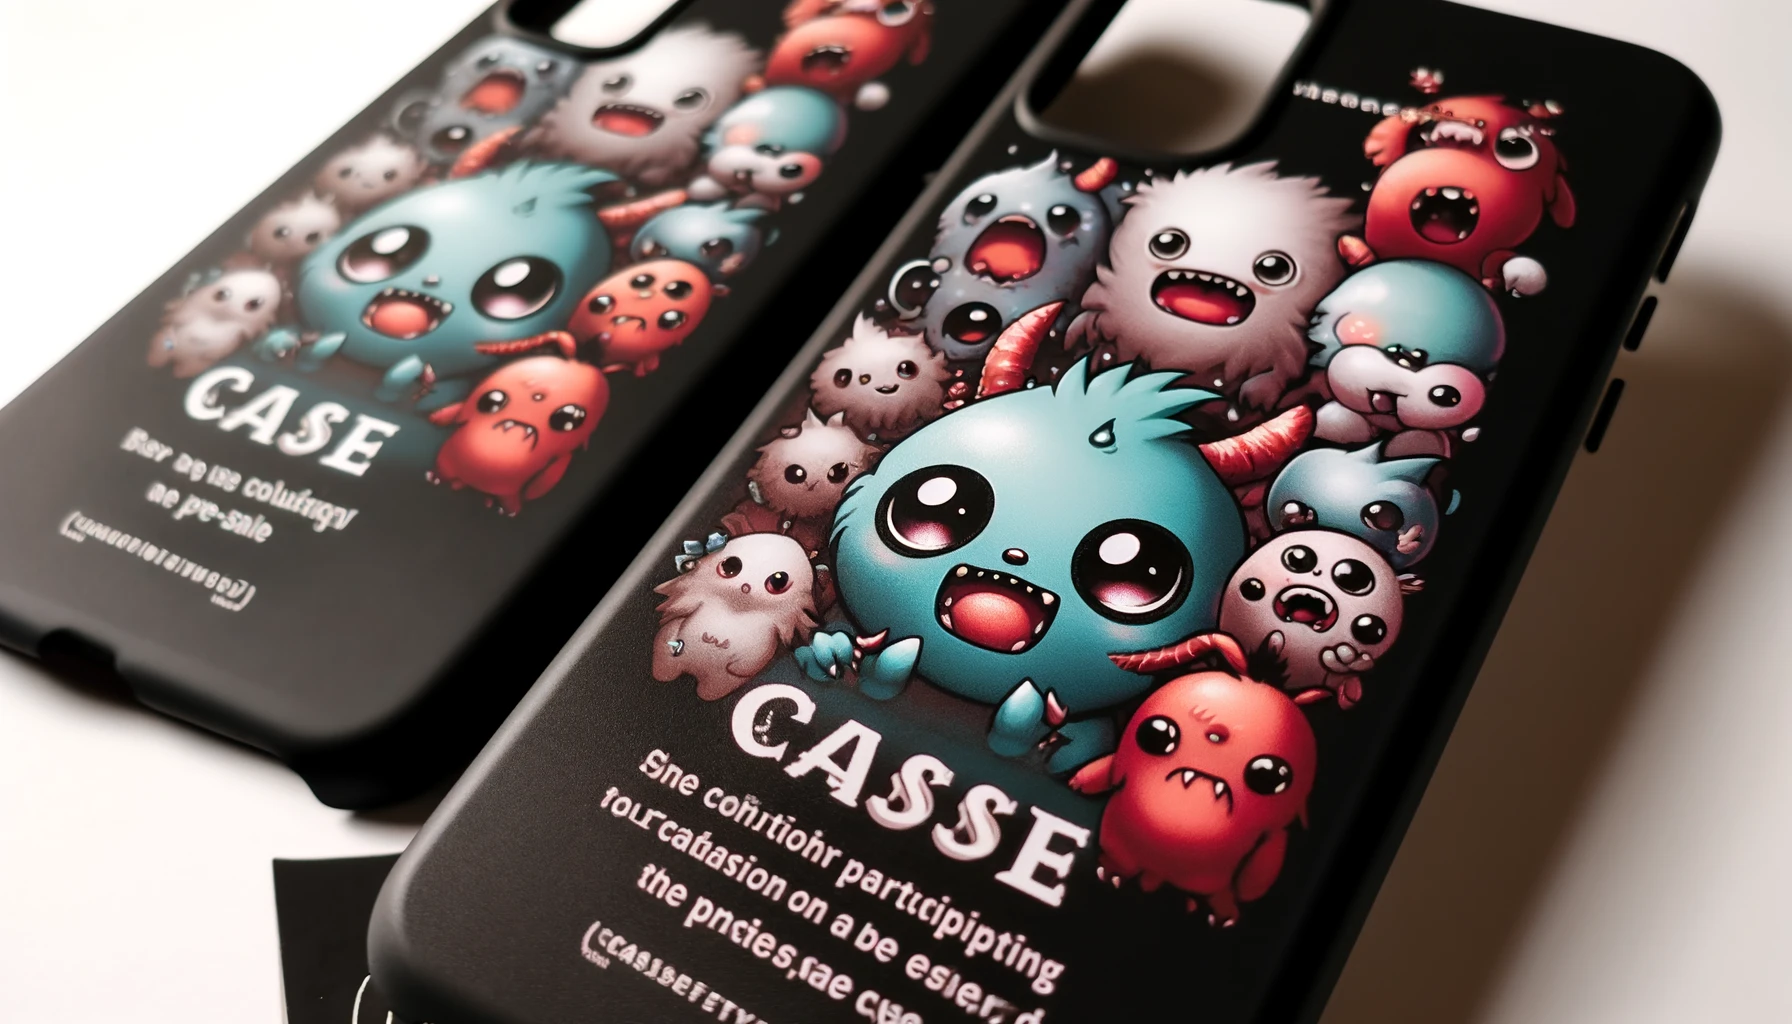 A promotional image for CASETiFY smartphone cases featuring small monster anime characters, highlighting the conditions for participating in the pre-sale. The design should emphasize the exclusivity and excitement of the pre-sale event. The word 'CASE' should be prominently displayed on the image.